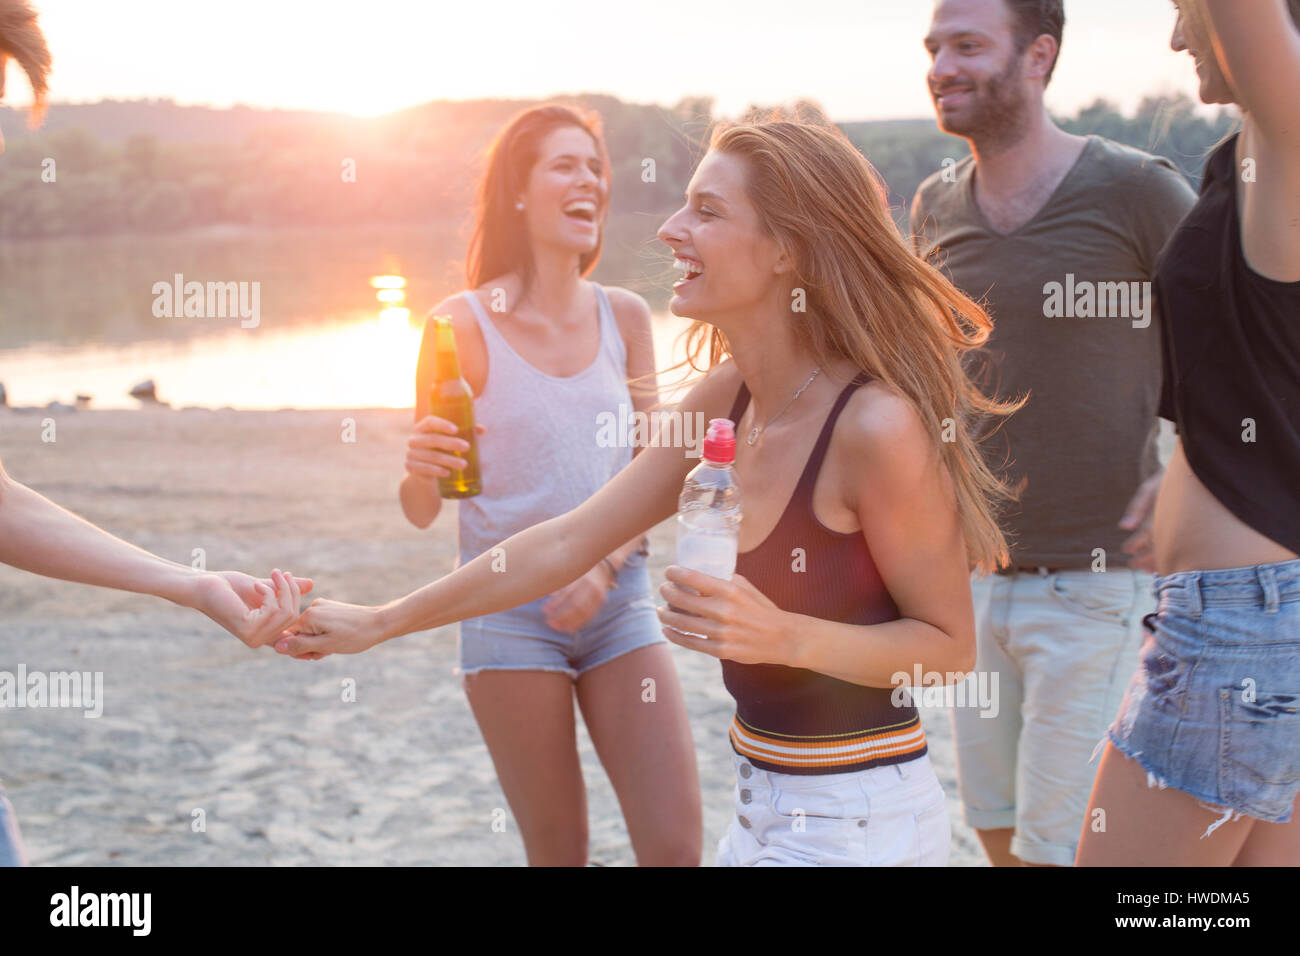 Group of friends drinking, enjoying beach party Stock Photo